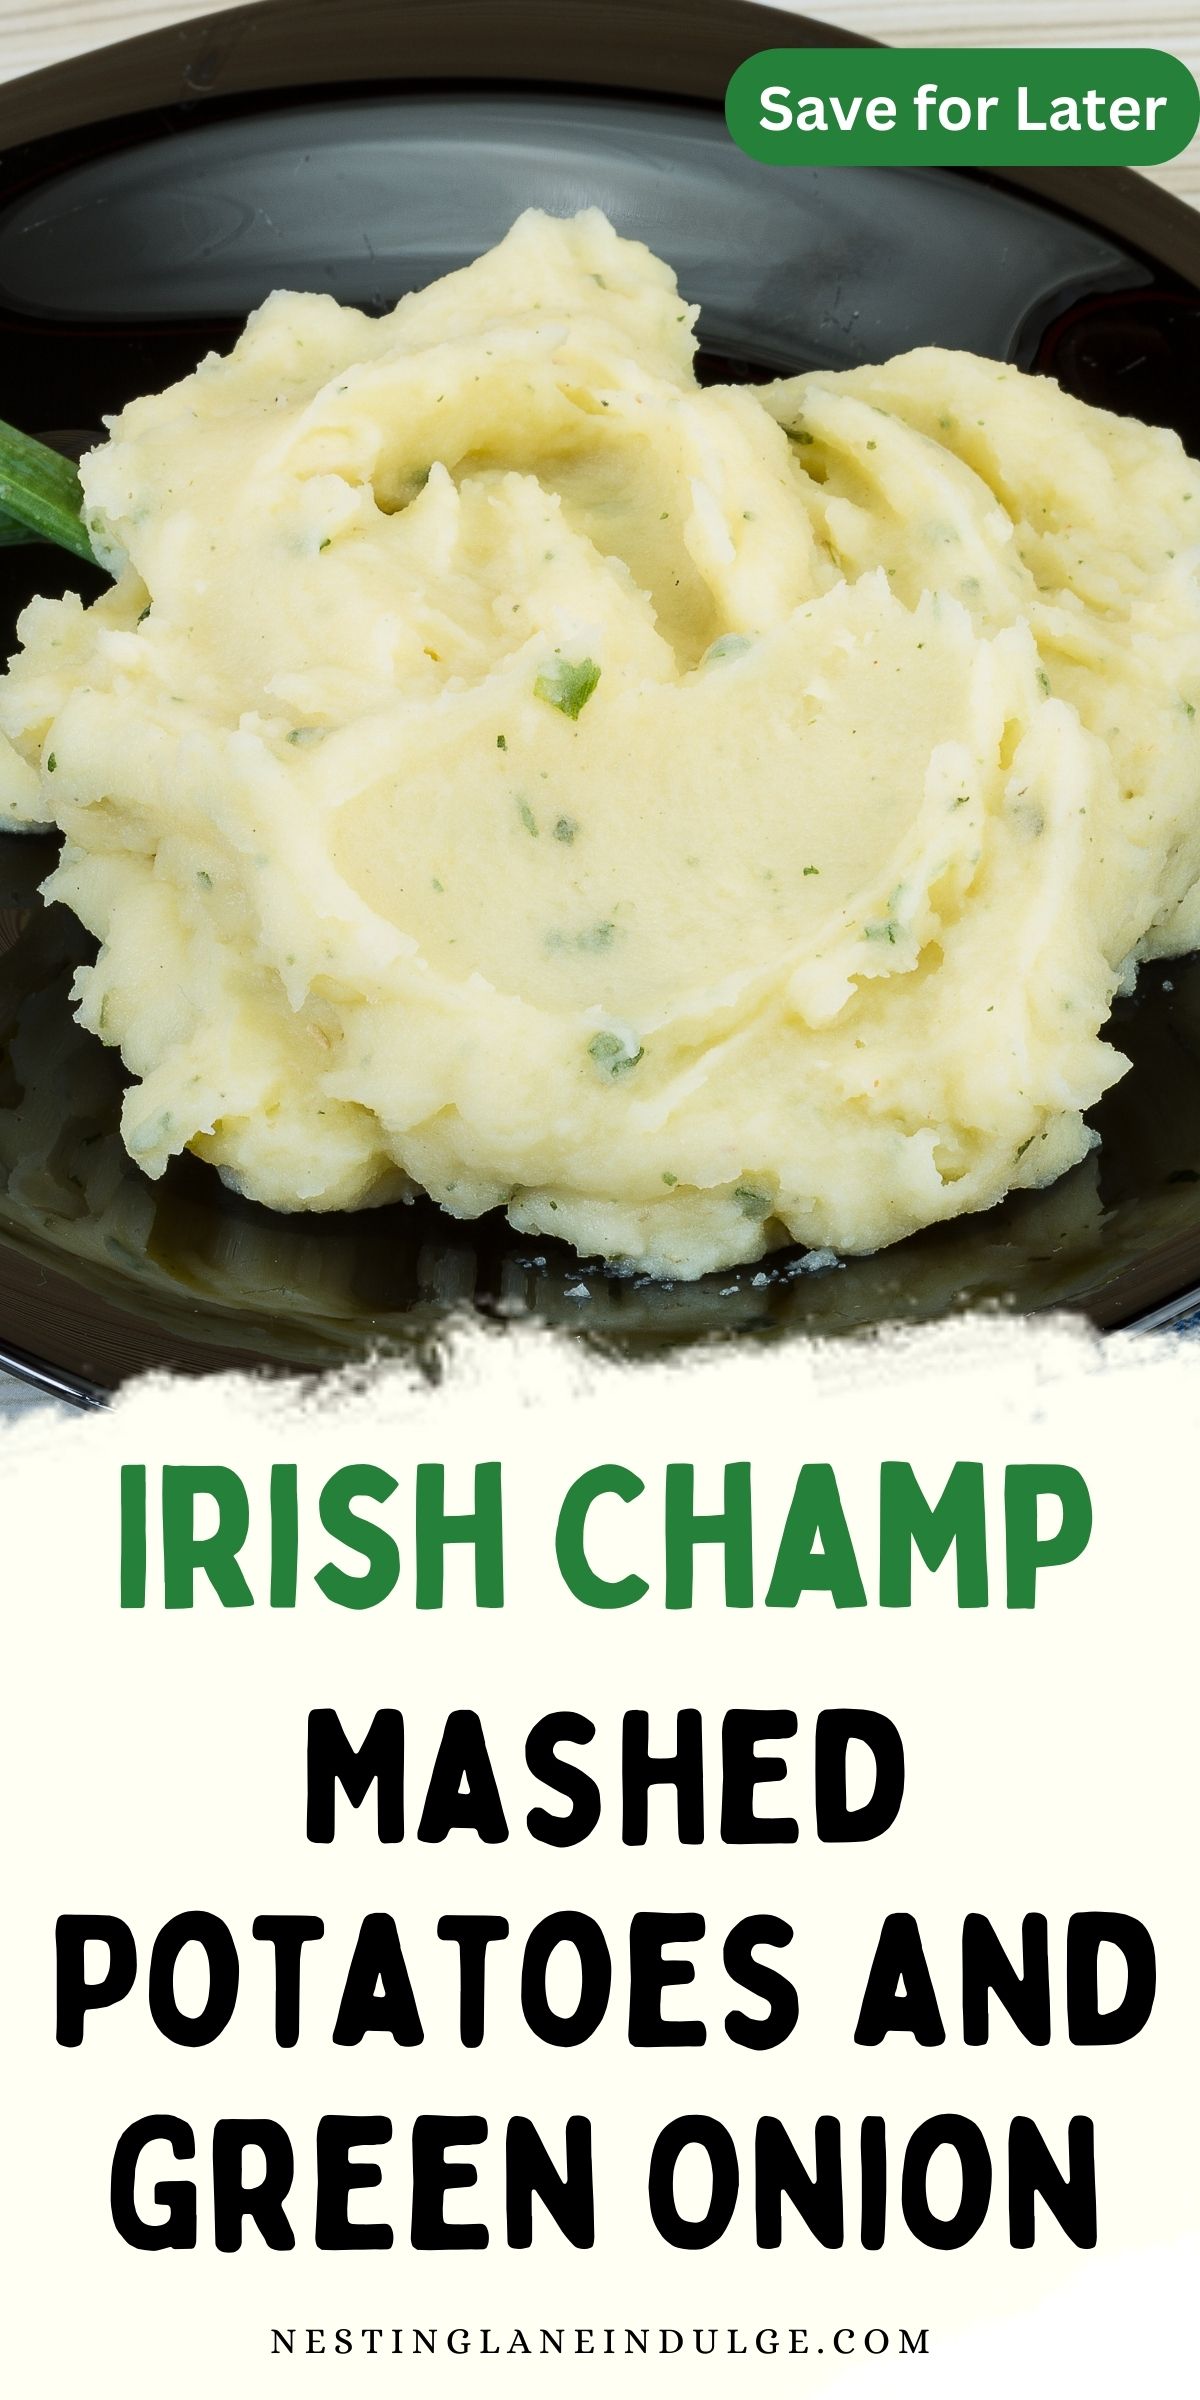 A close-up of Irish Champ, mashed potatoes with green onion, on a dark plate with a 'Save for Later' badge, suggesting a recipe pin for future use.